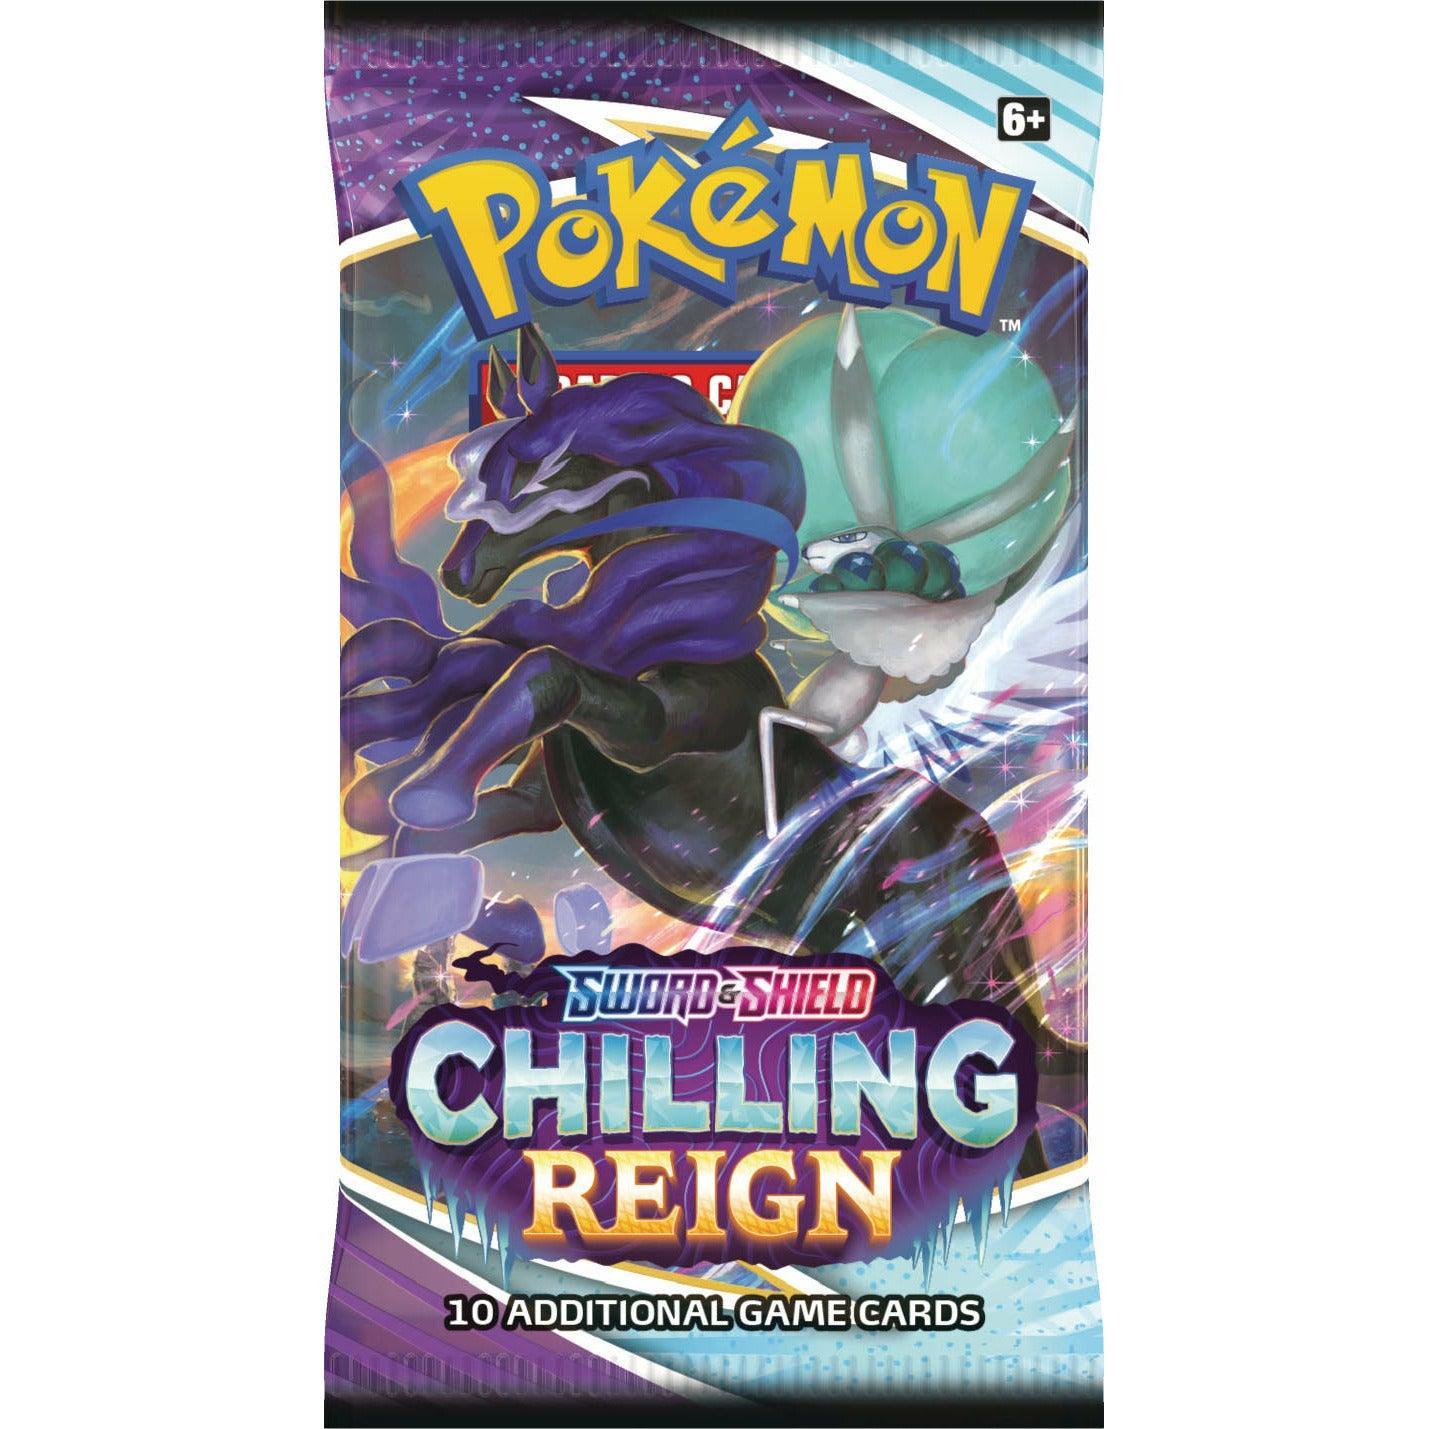 Pokemon Trading Cards Set of 10 Cards - Chilling Reign (Random Style) - BumbleToys - 14 Years & Up, 8-13 Years, Boys, Card & Board Games, Pokémon, Pre-Order, Puzzle & Board & Card Games